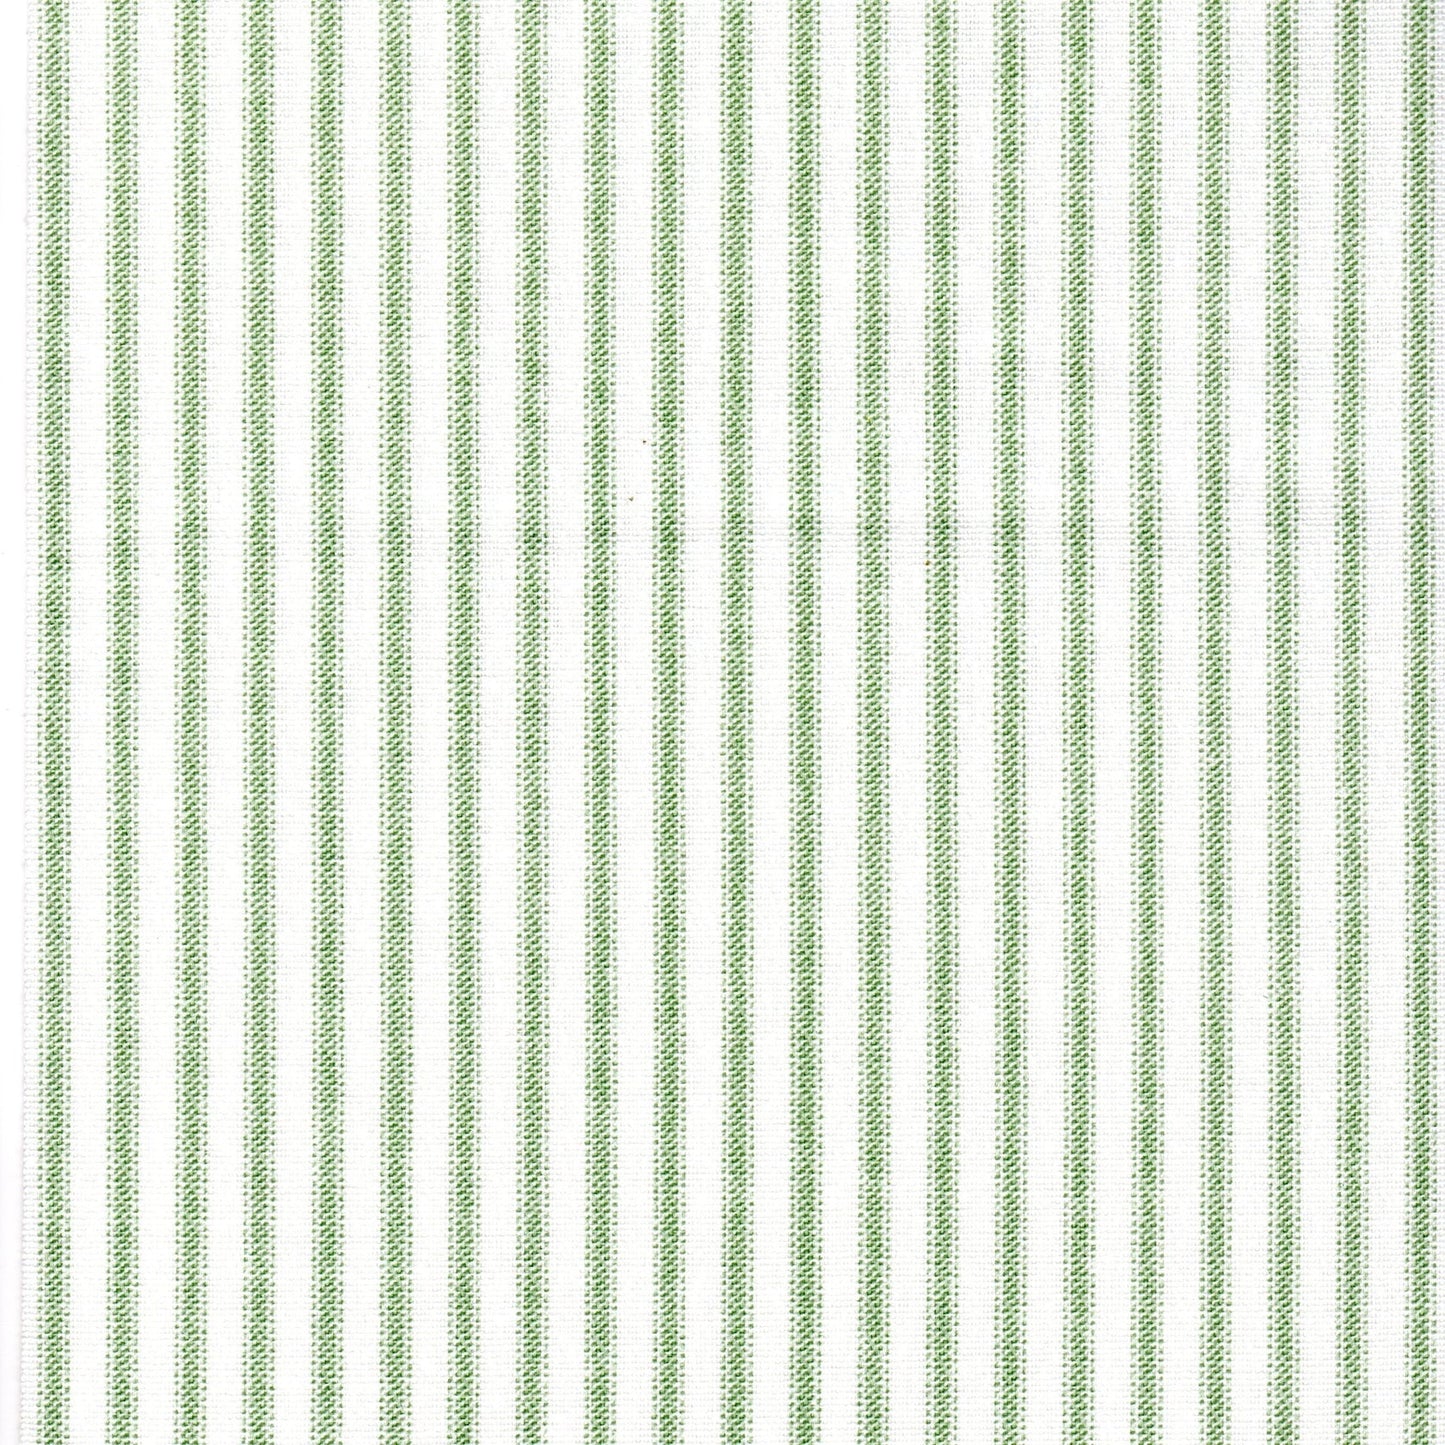 tie-up valance in Classic Sage Green Ticking Stripe on White